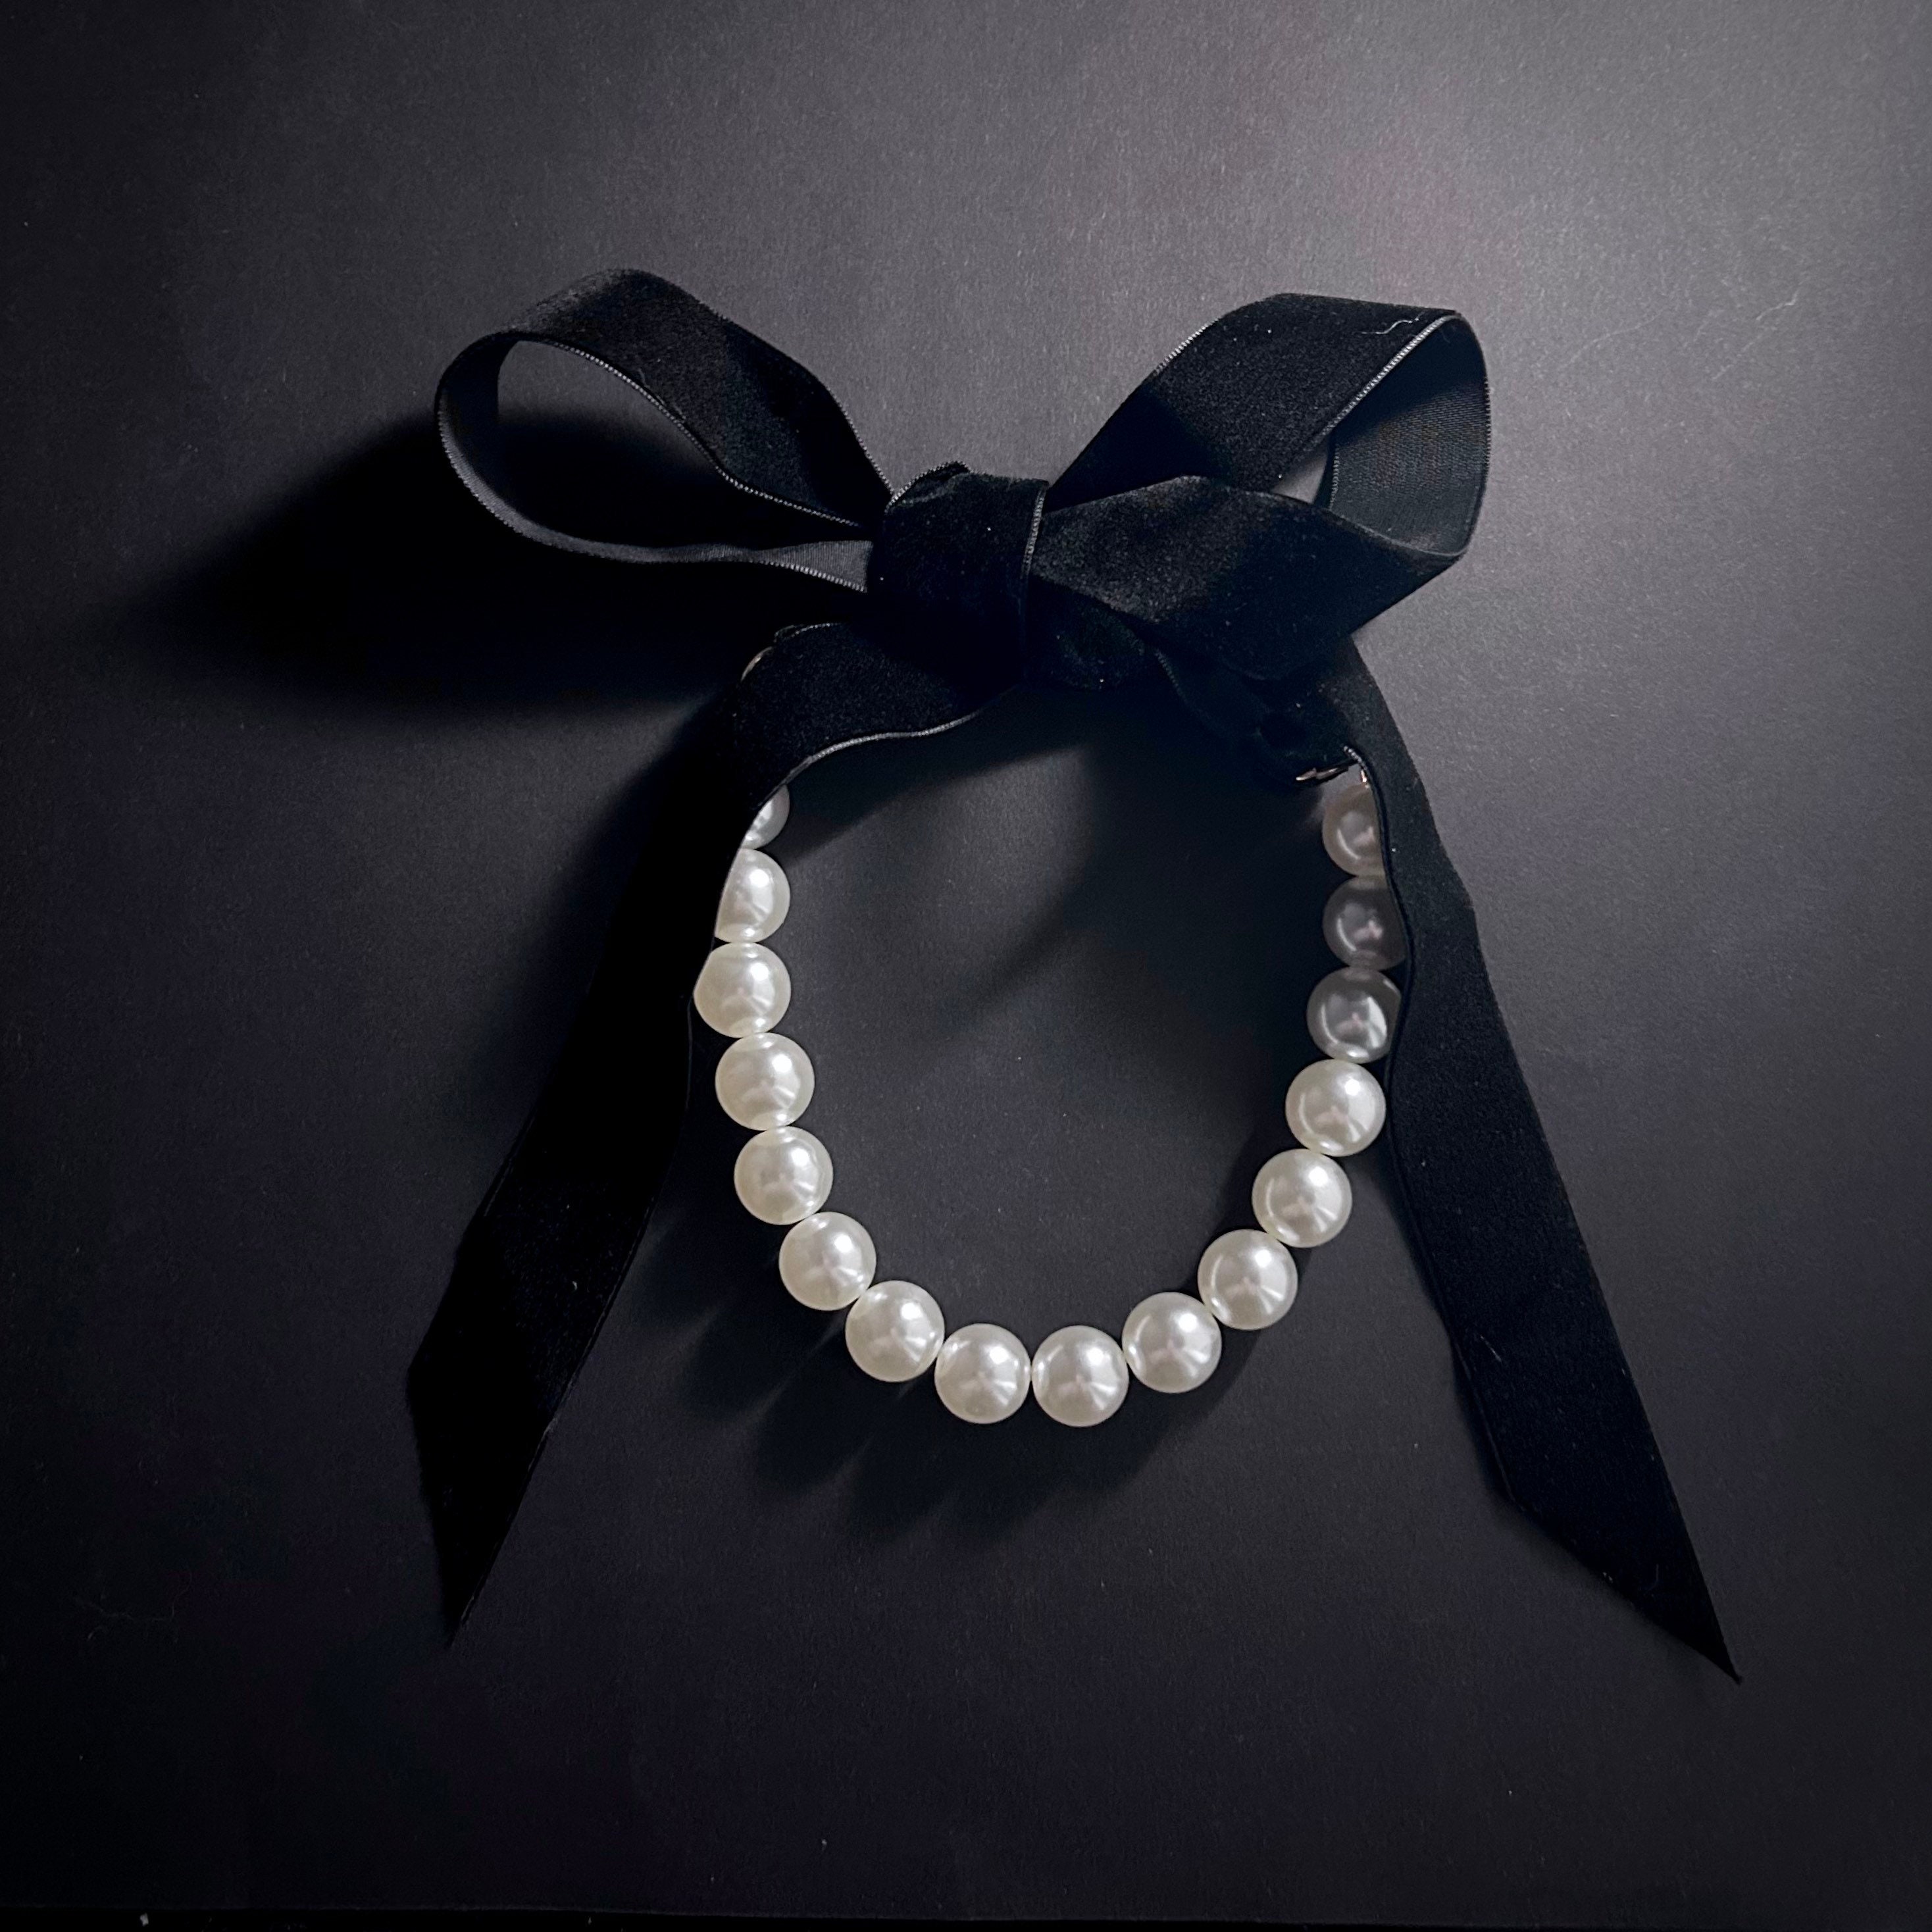 Large Faux Pearl Necklace w/ Black Ribbon Bow & 3 Additional Ribbons Colors